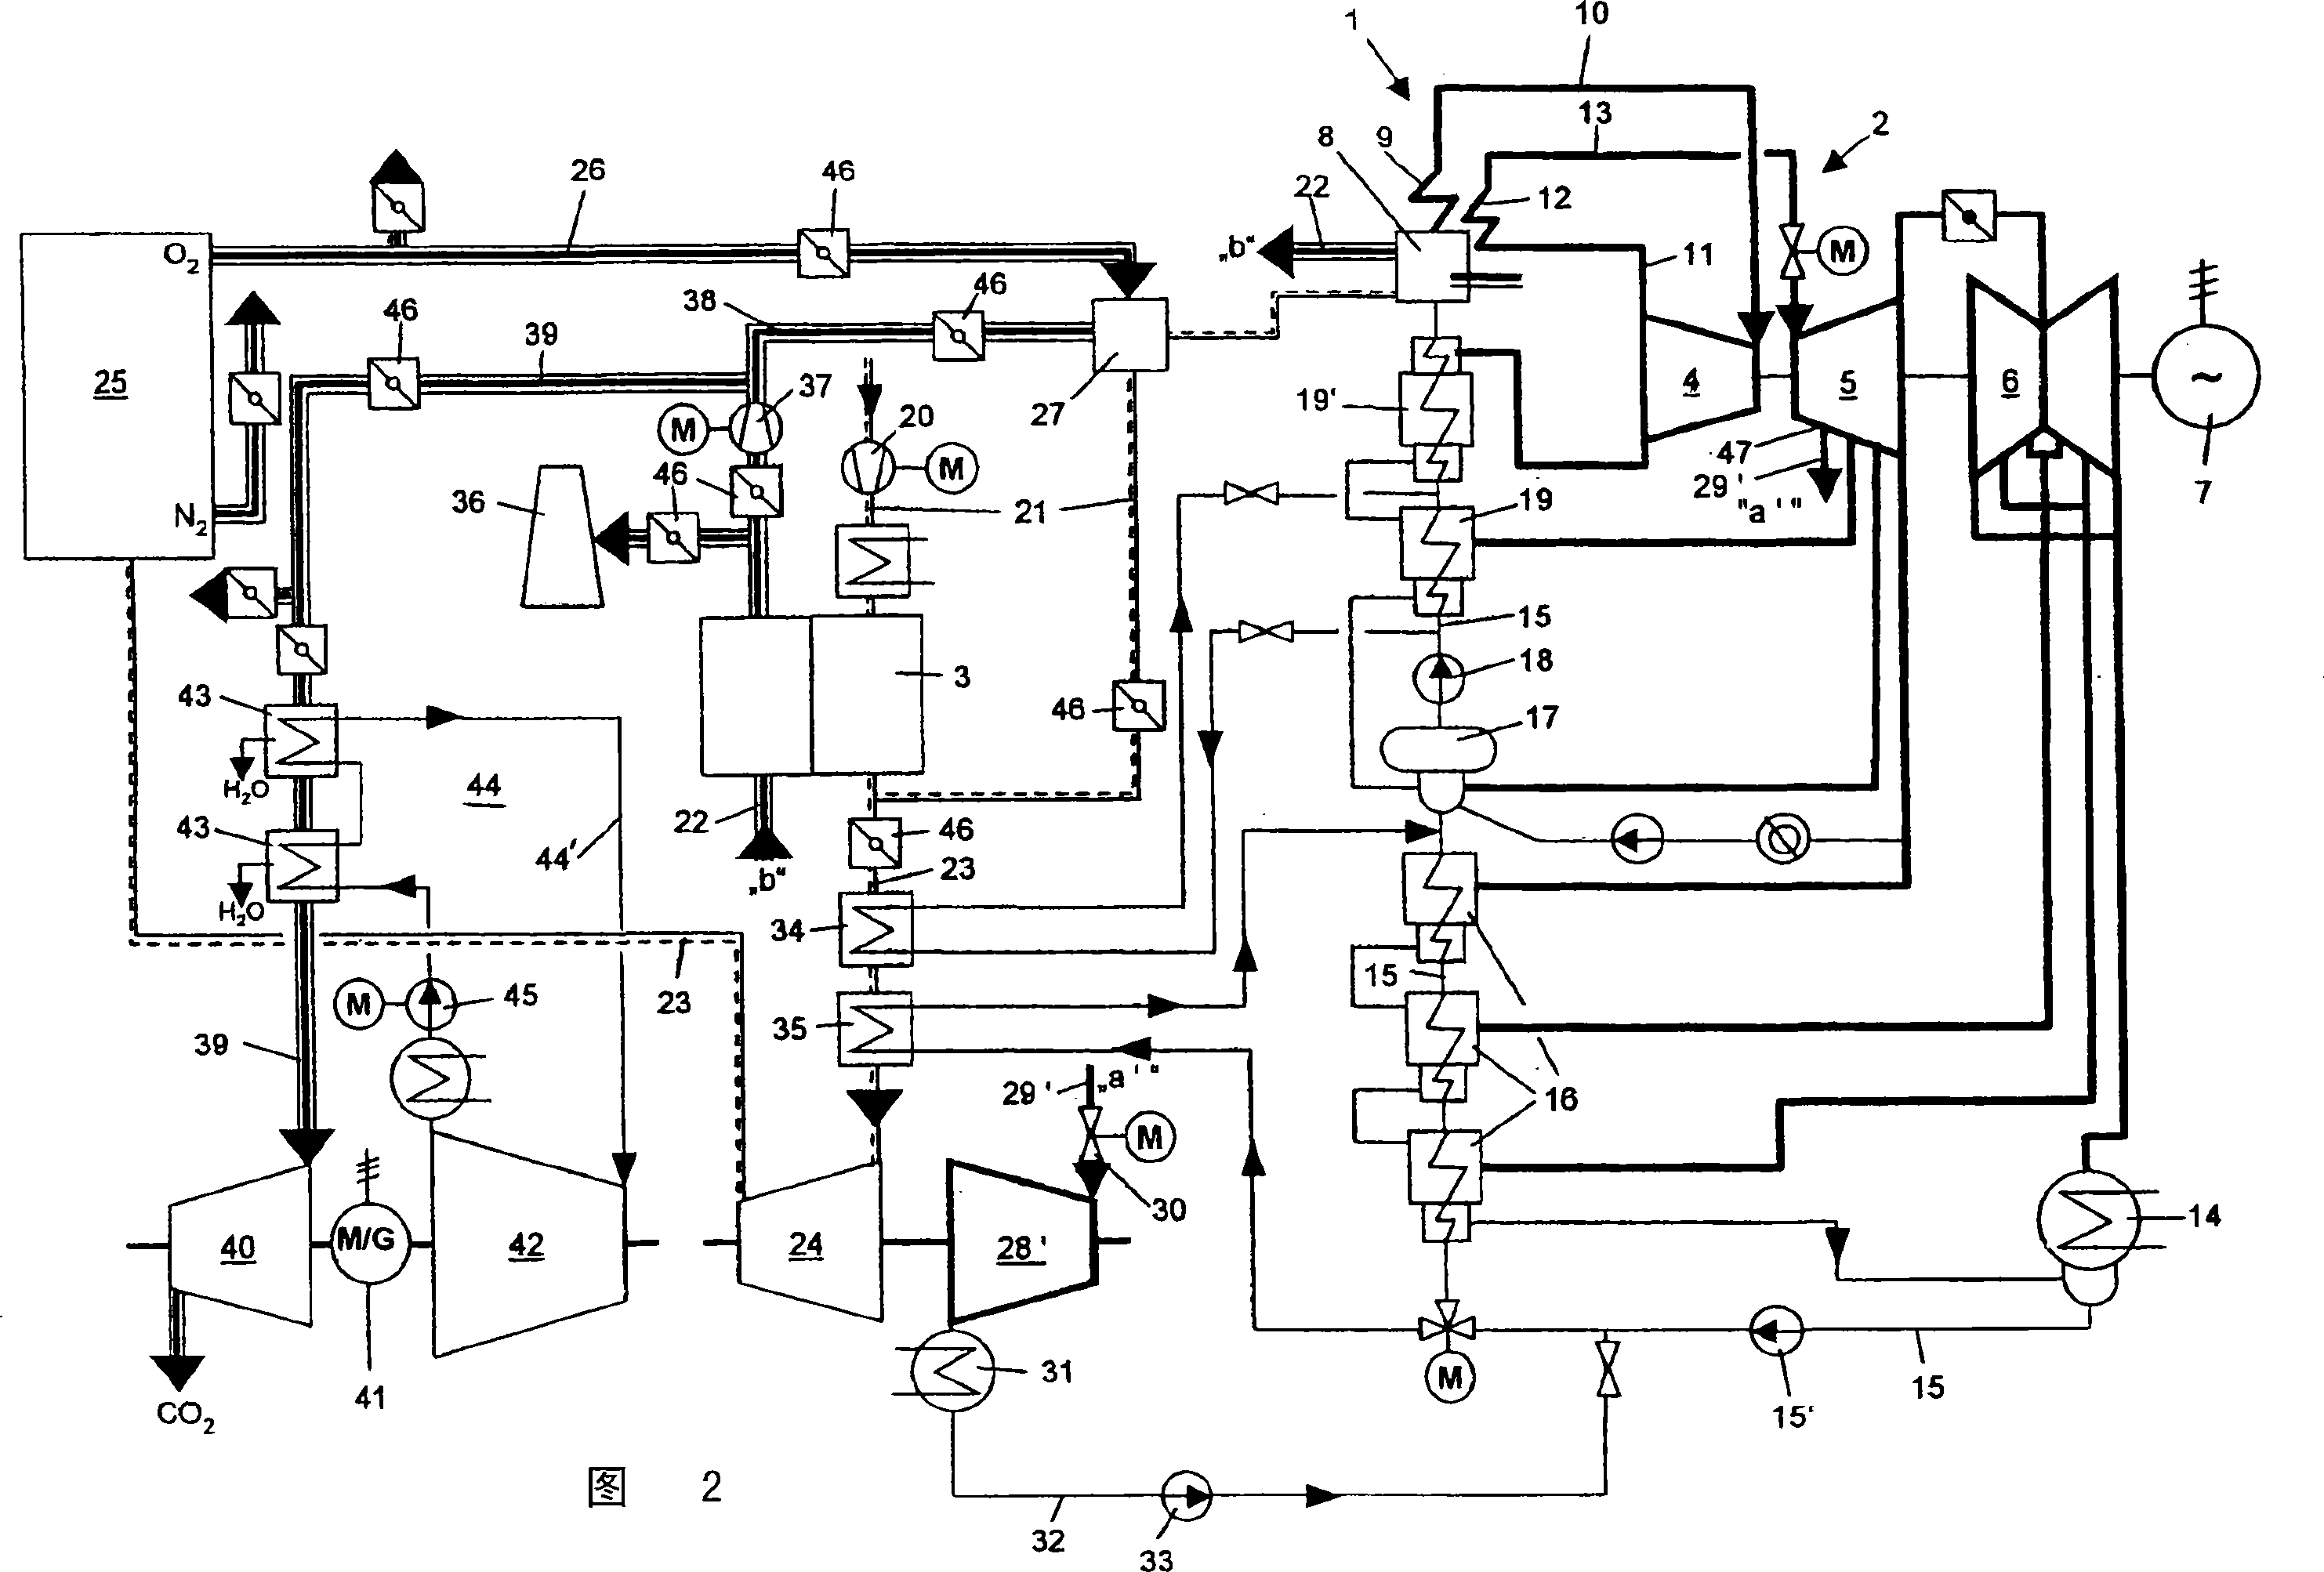 Steam generation plant and method for operation and retrofitting of a steam generation plant